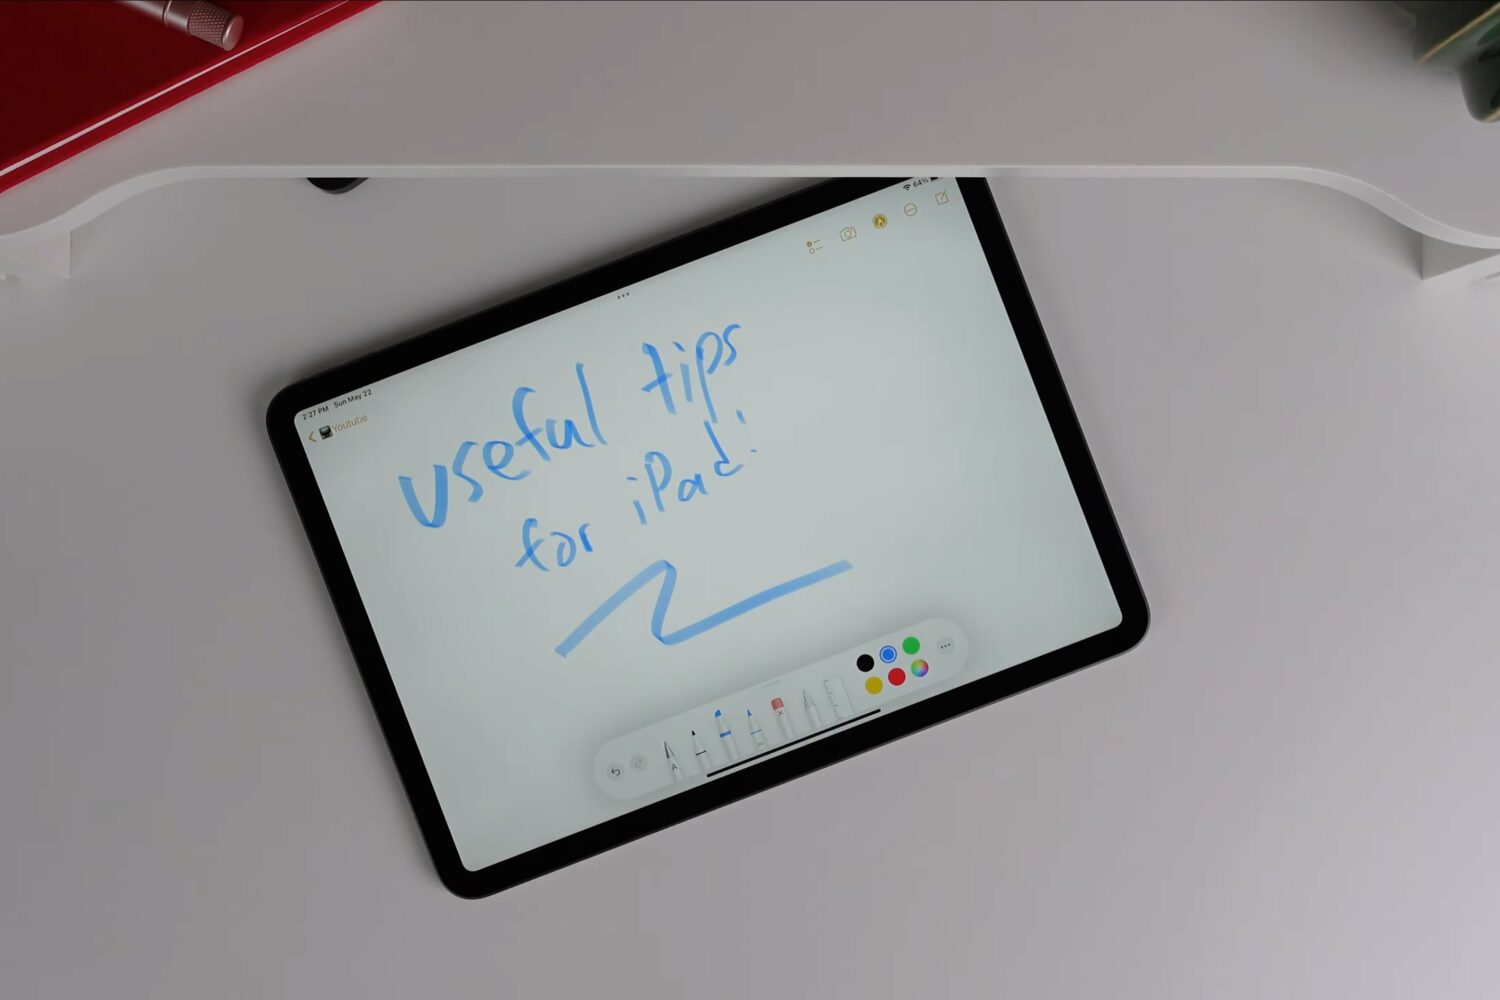 In this photo, Apple's iPad is seen laid flat on its back on a table. A handwritten note saying "Useful tips for iPad!" is shown on the screen.